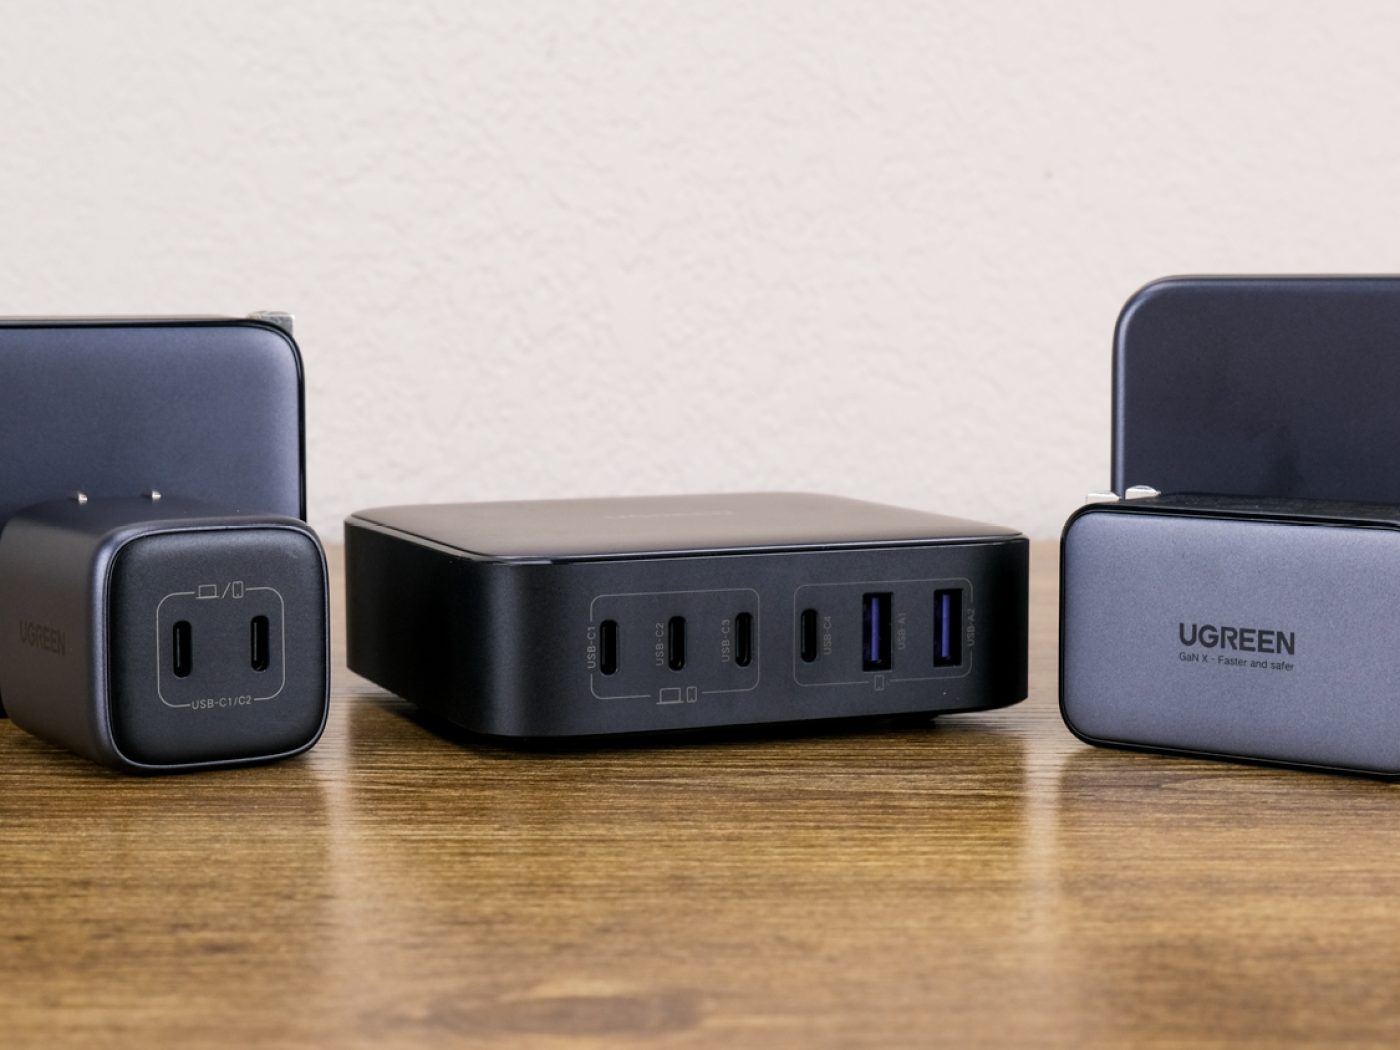 The new 65W and 100W Ugreen desktop chargers look great